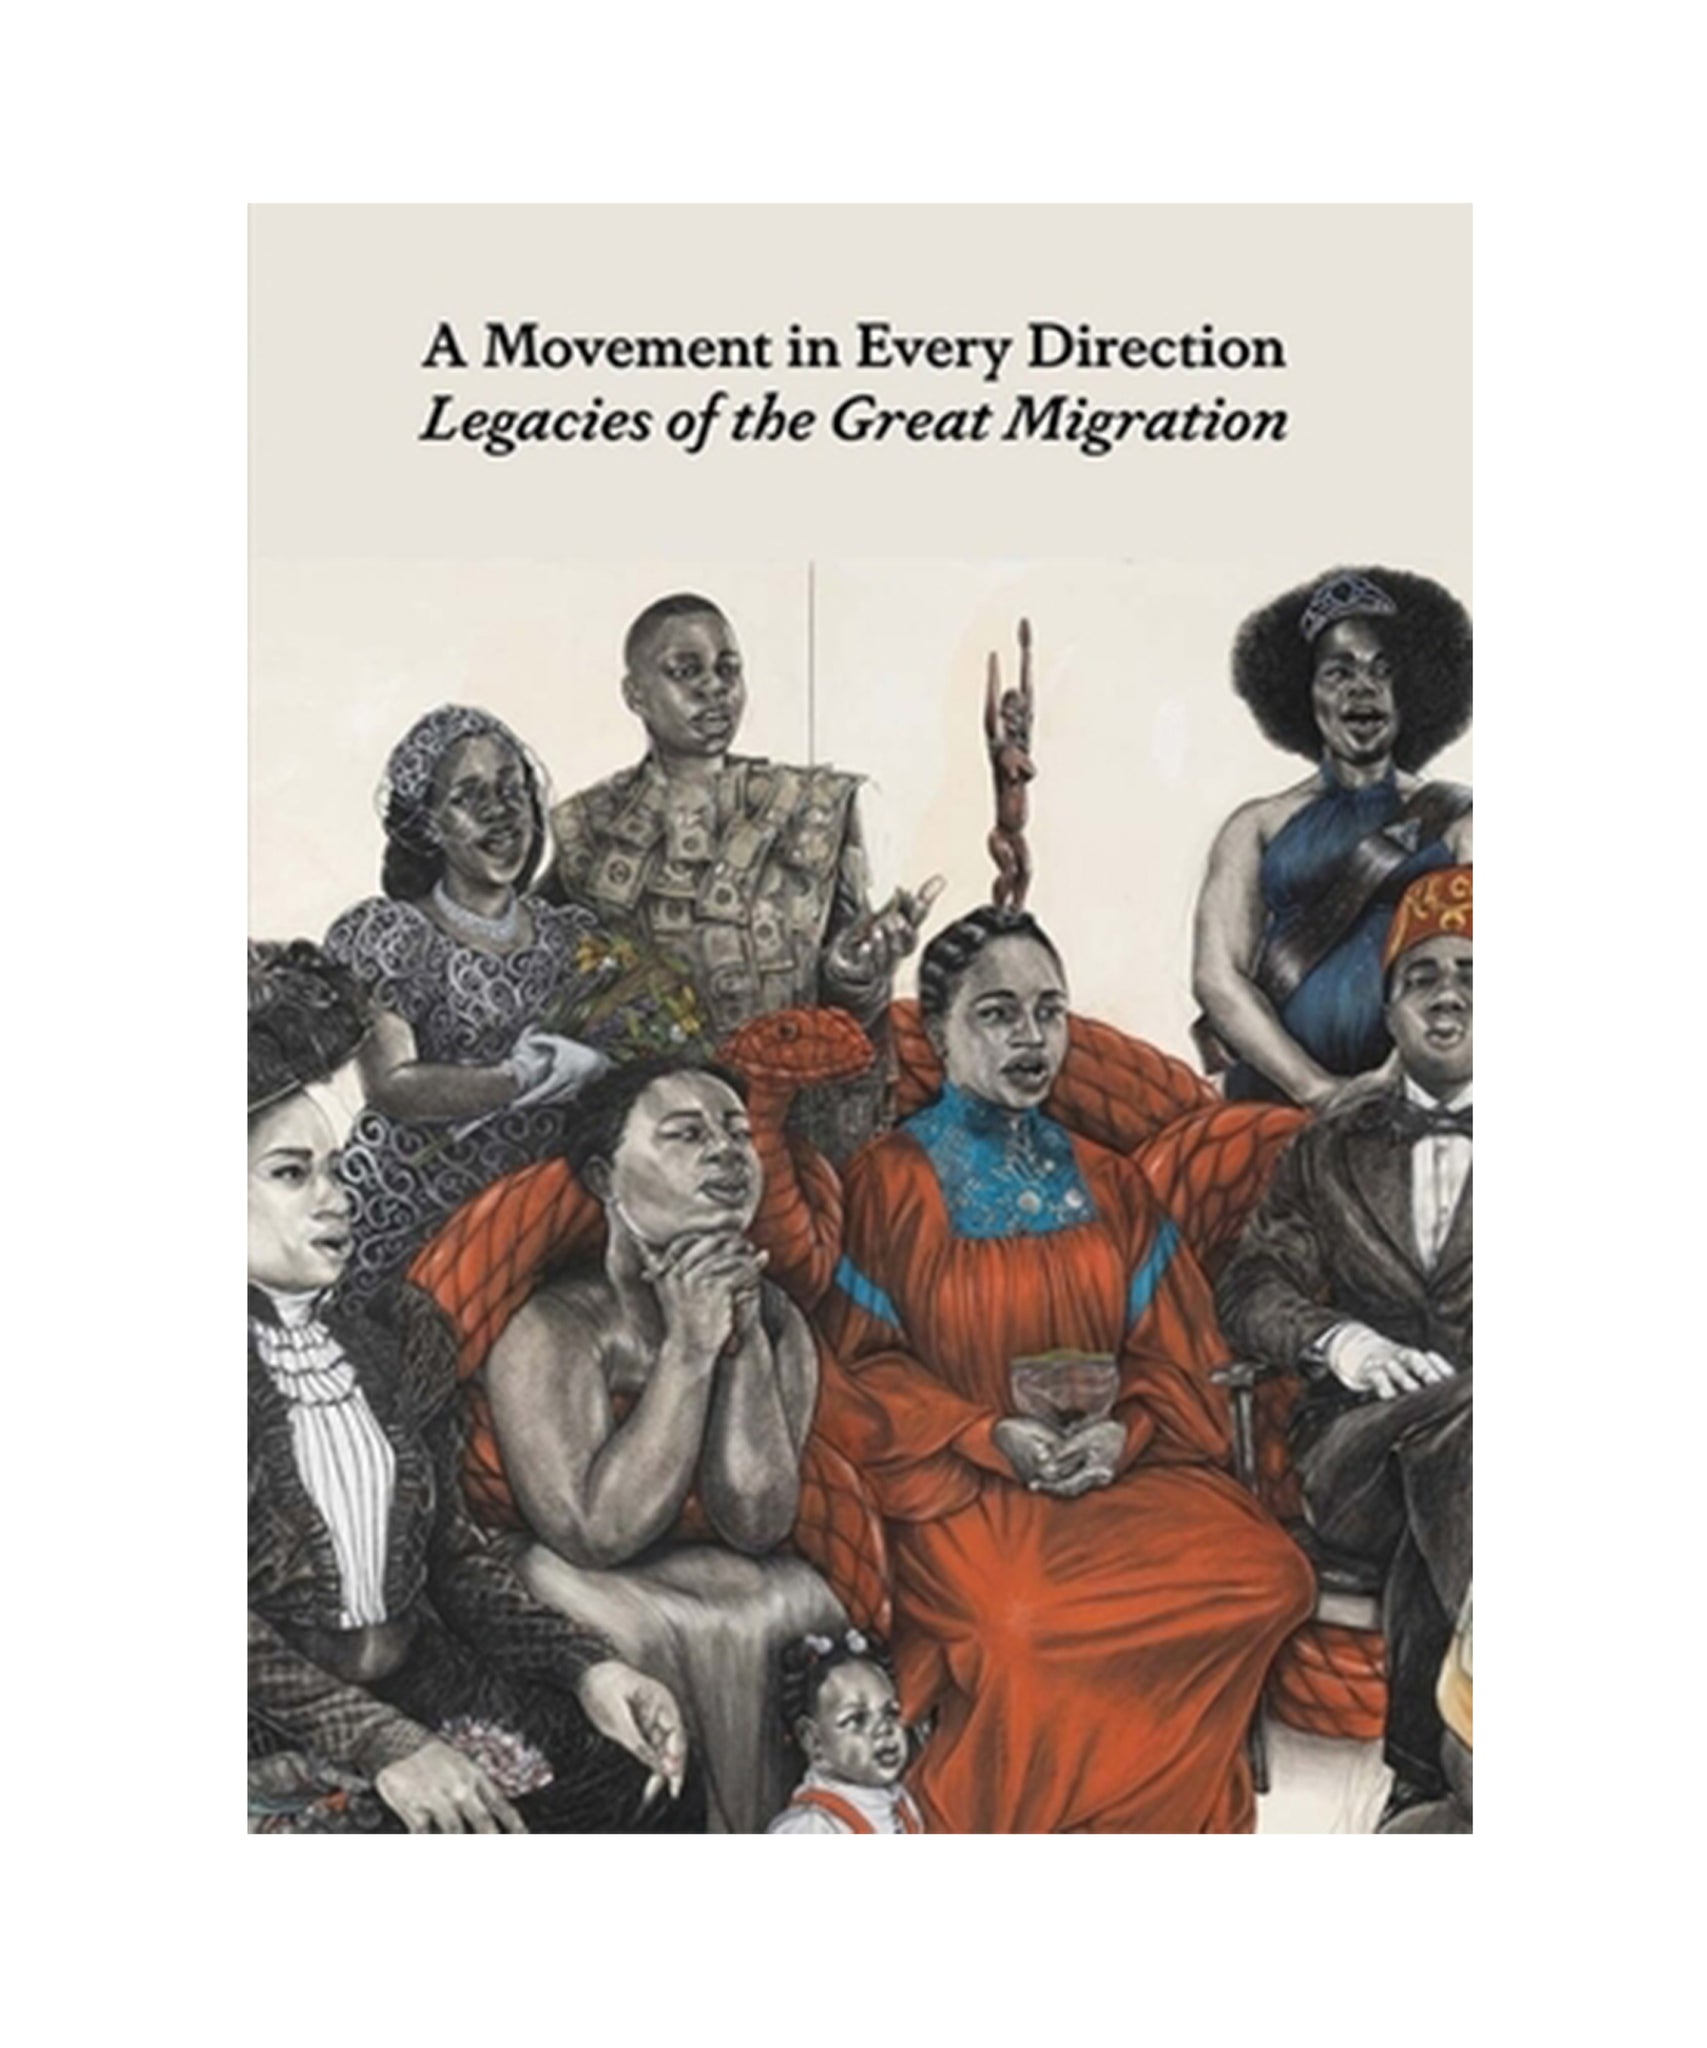 A Movement in Every Direction: Legacies of the Great Migration